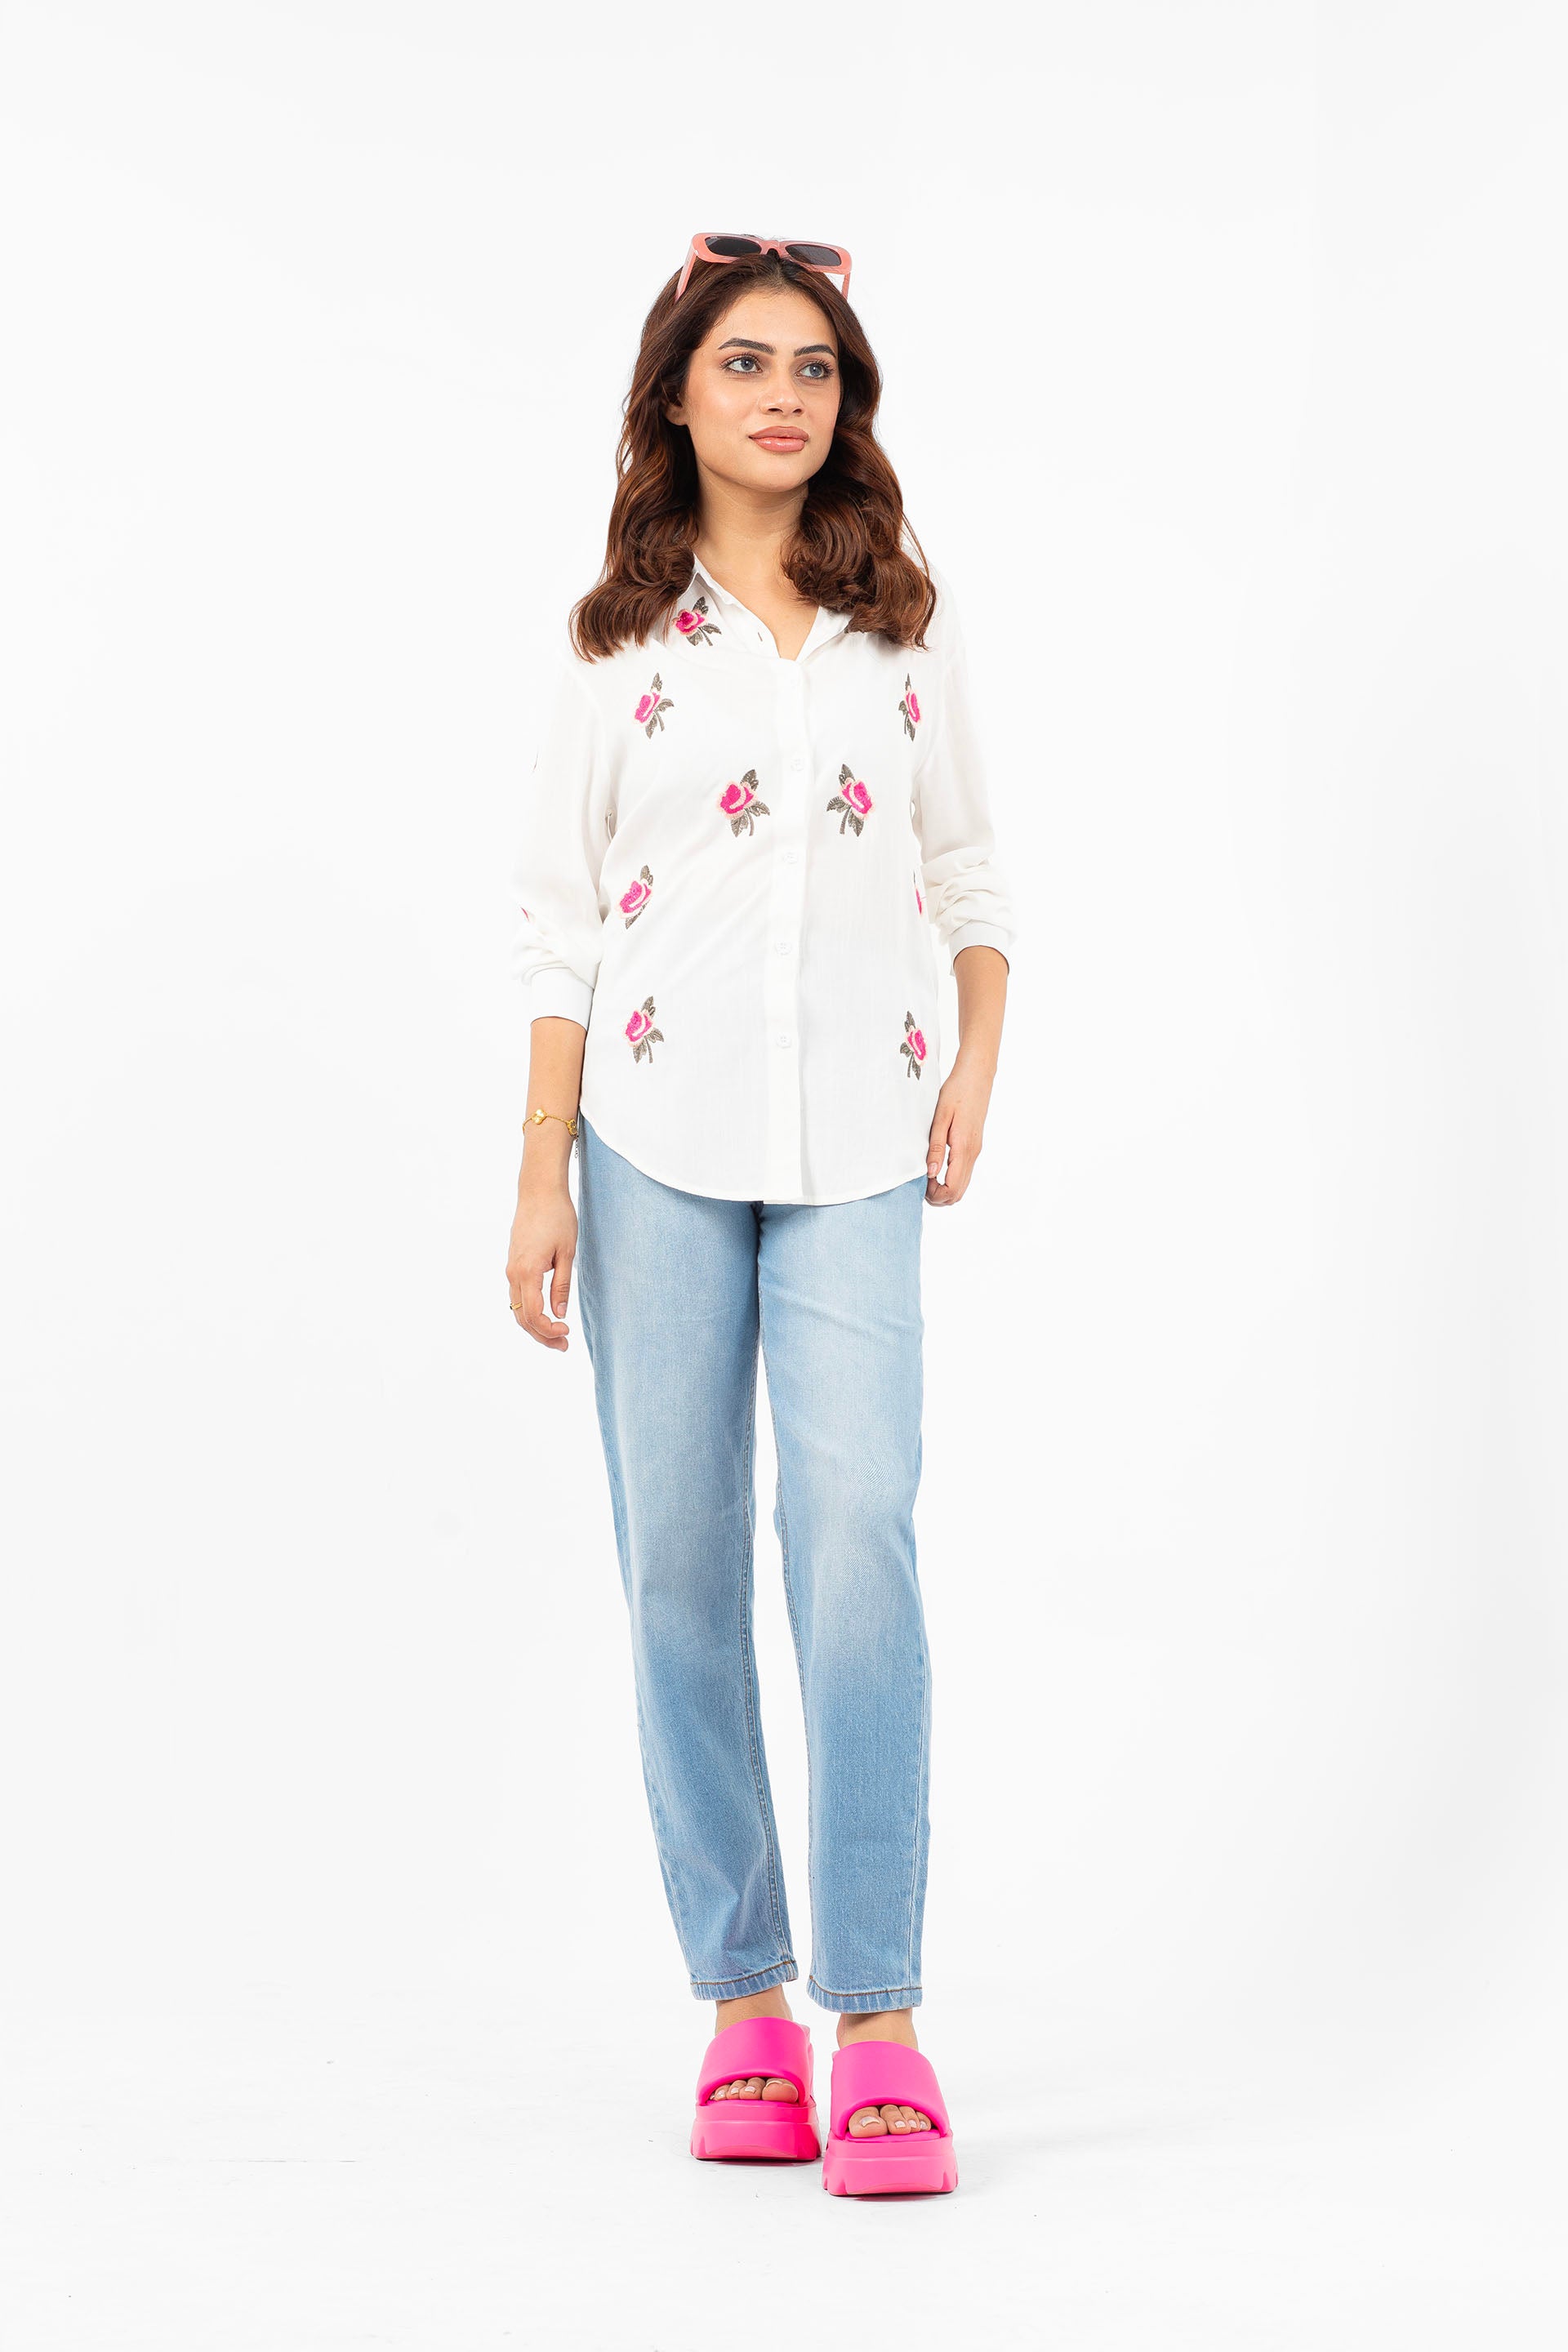 Cropped Mom Jeans Blue